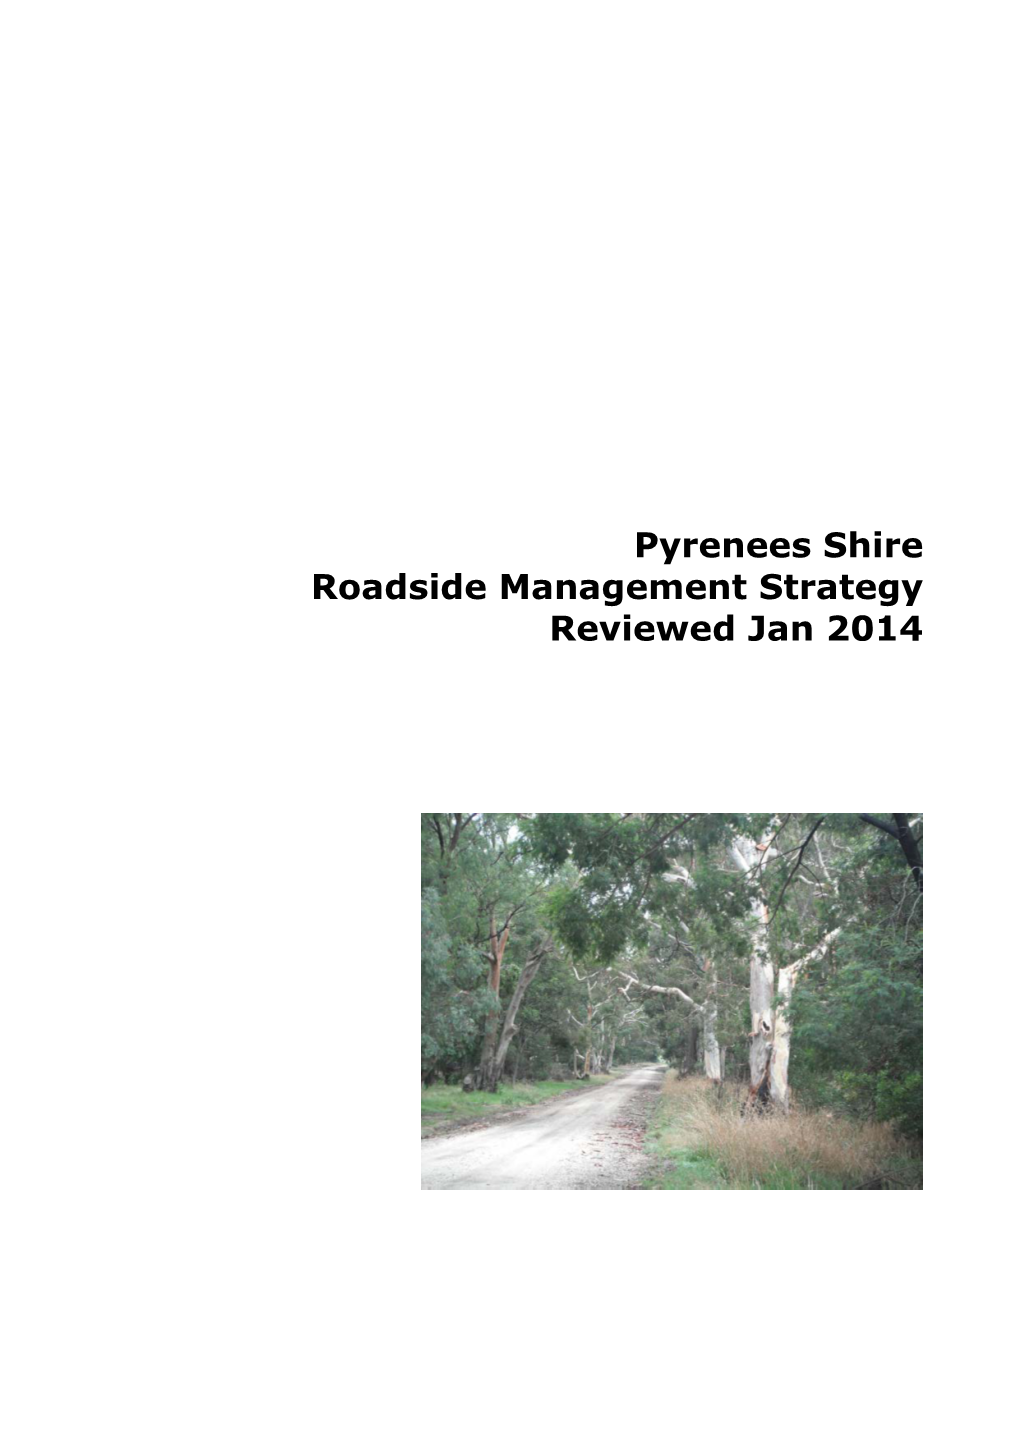 Pyrenees Shire Roadside Management Strategy Reviewed Jan 2014